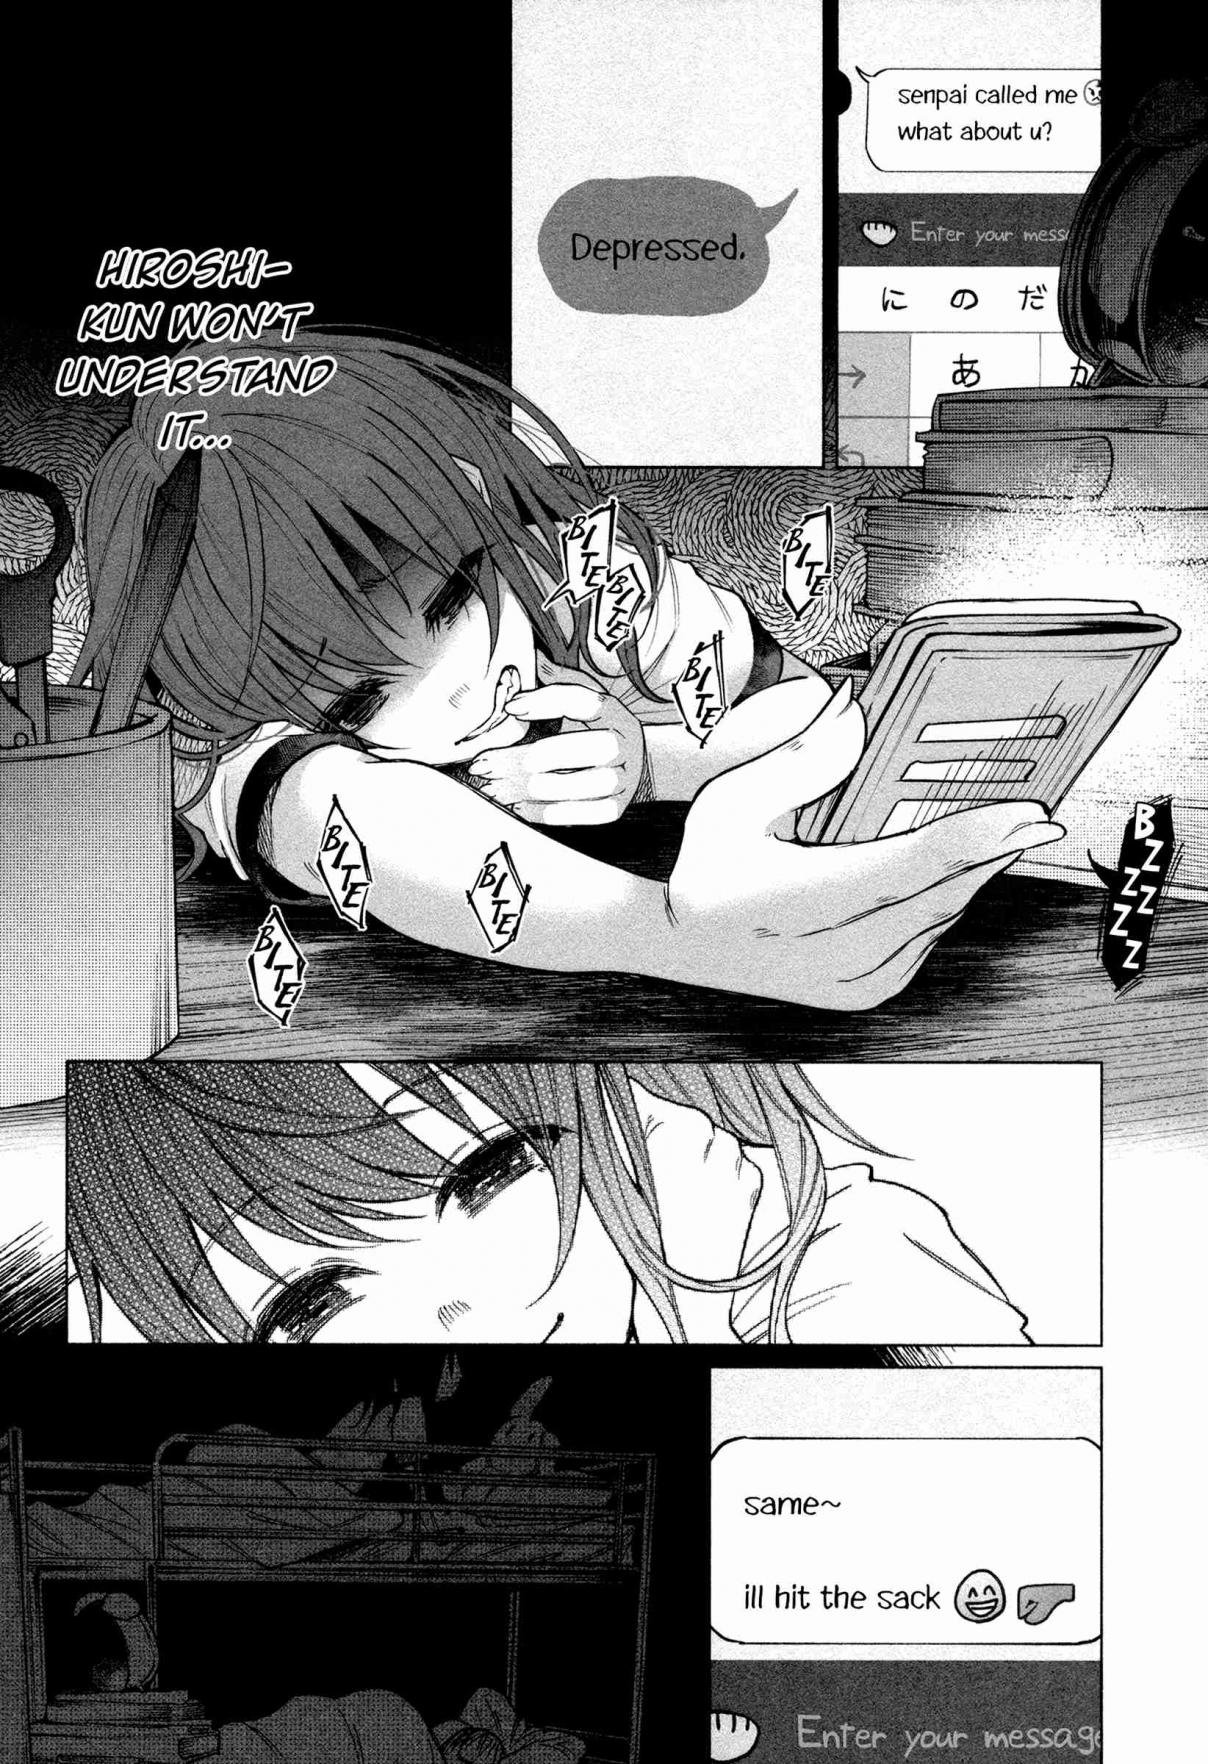 You Loved Me So Much It Hurt Vol. 1 Ch. 2 Normal